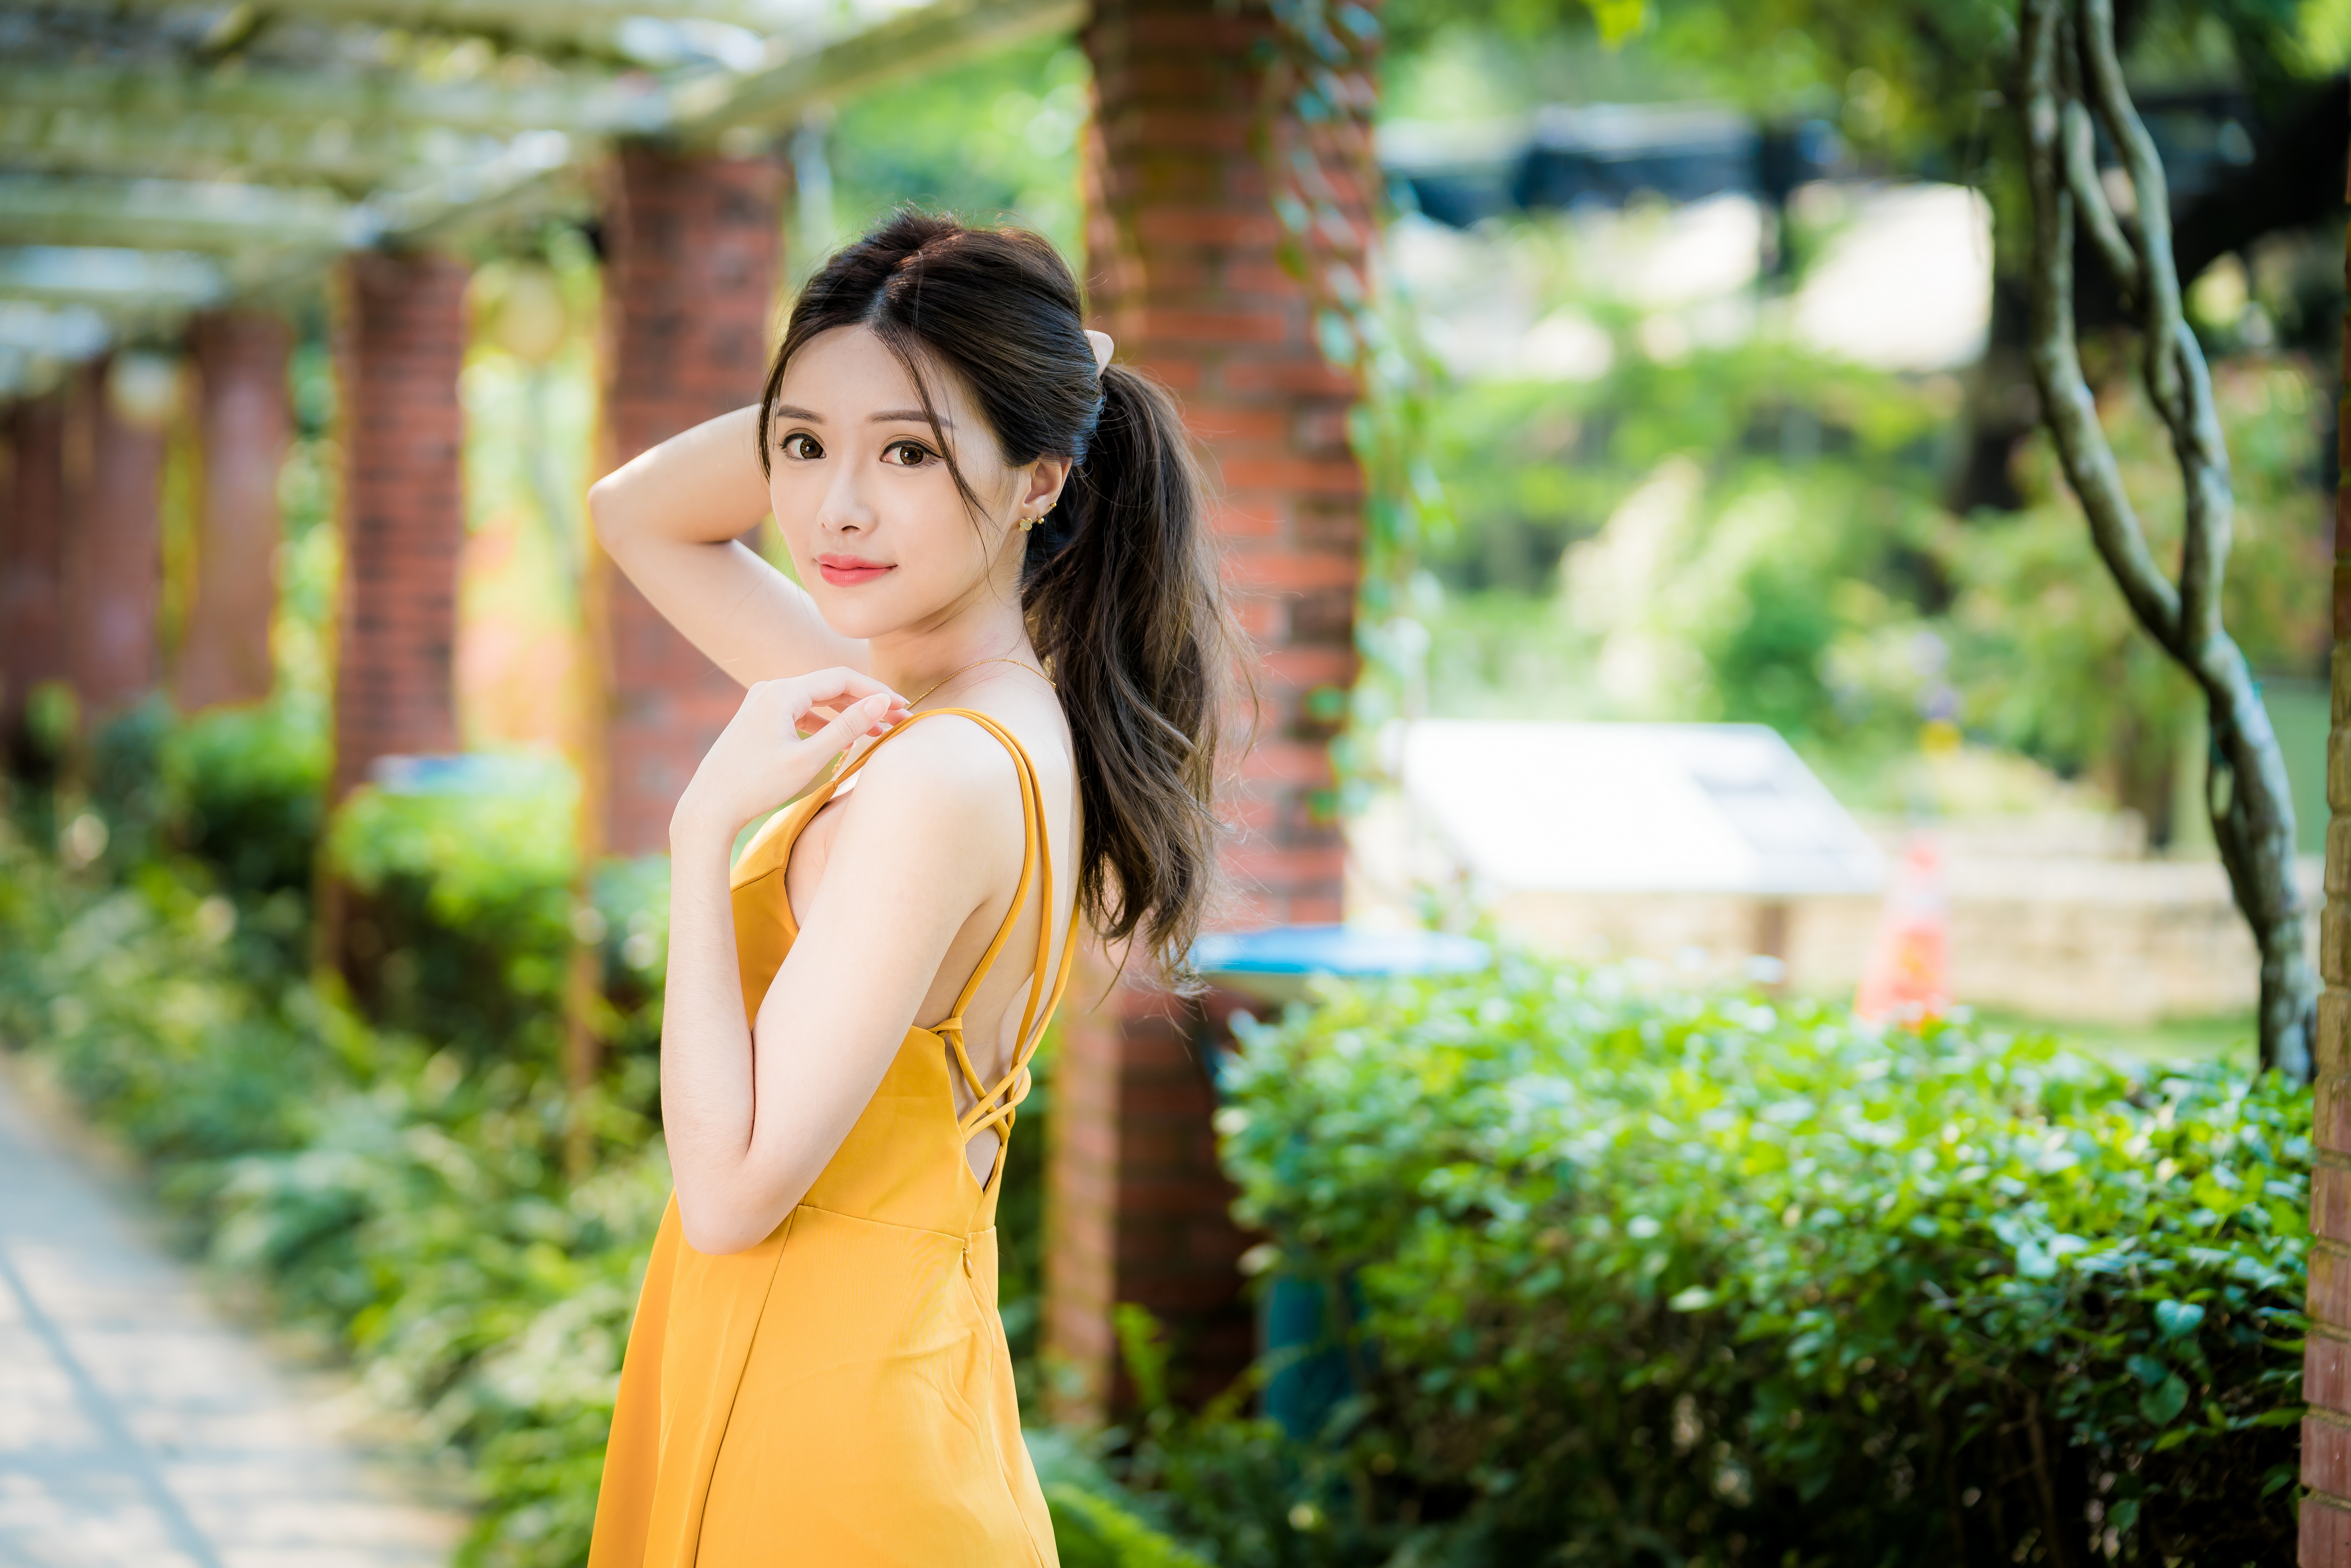 Young Lady Makes a Cute Pose for Camera Stock Image - Image of young,  lifestyle: 178734973